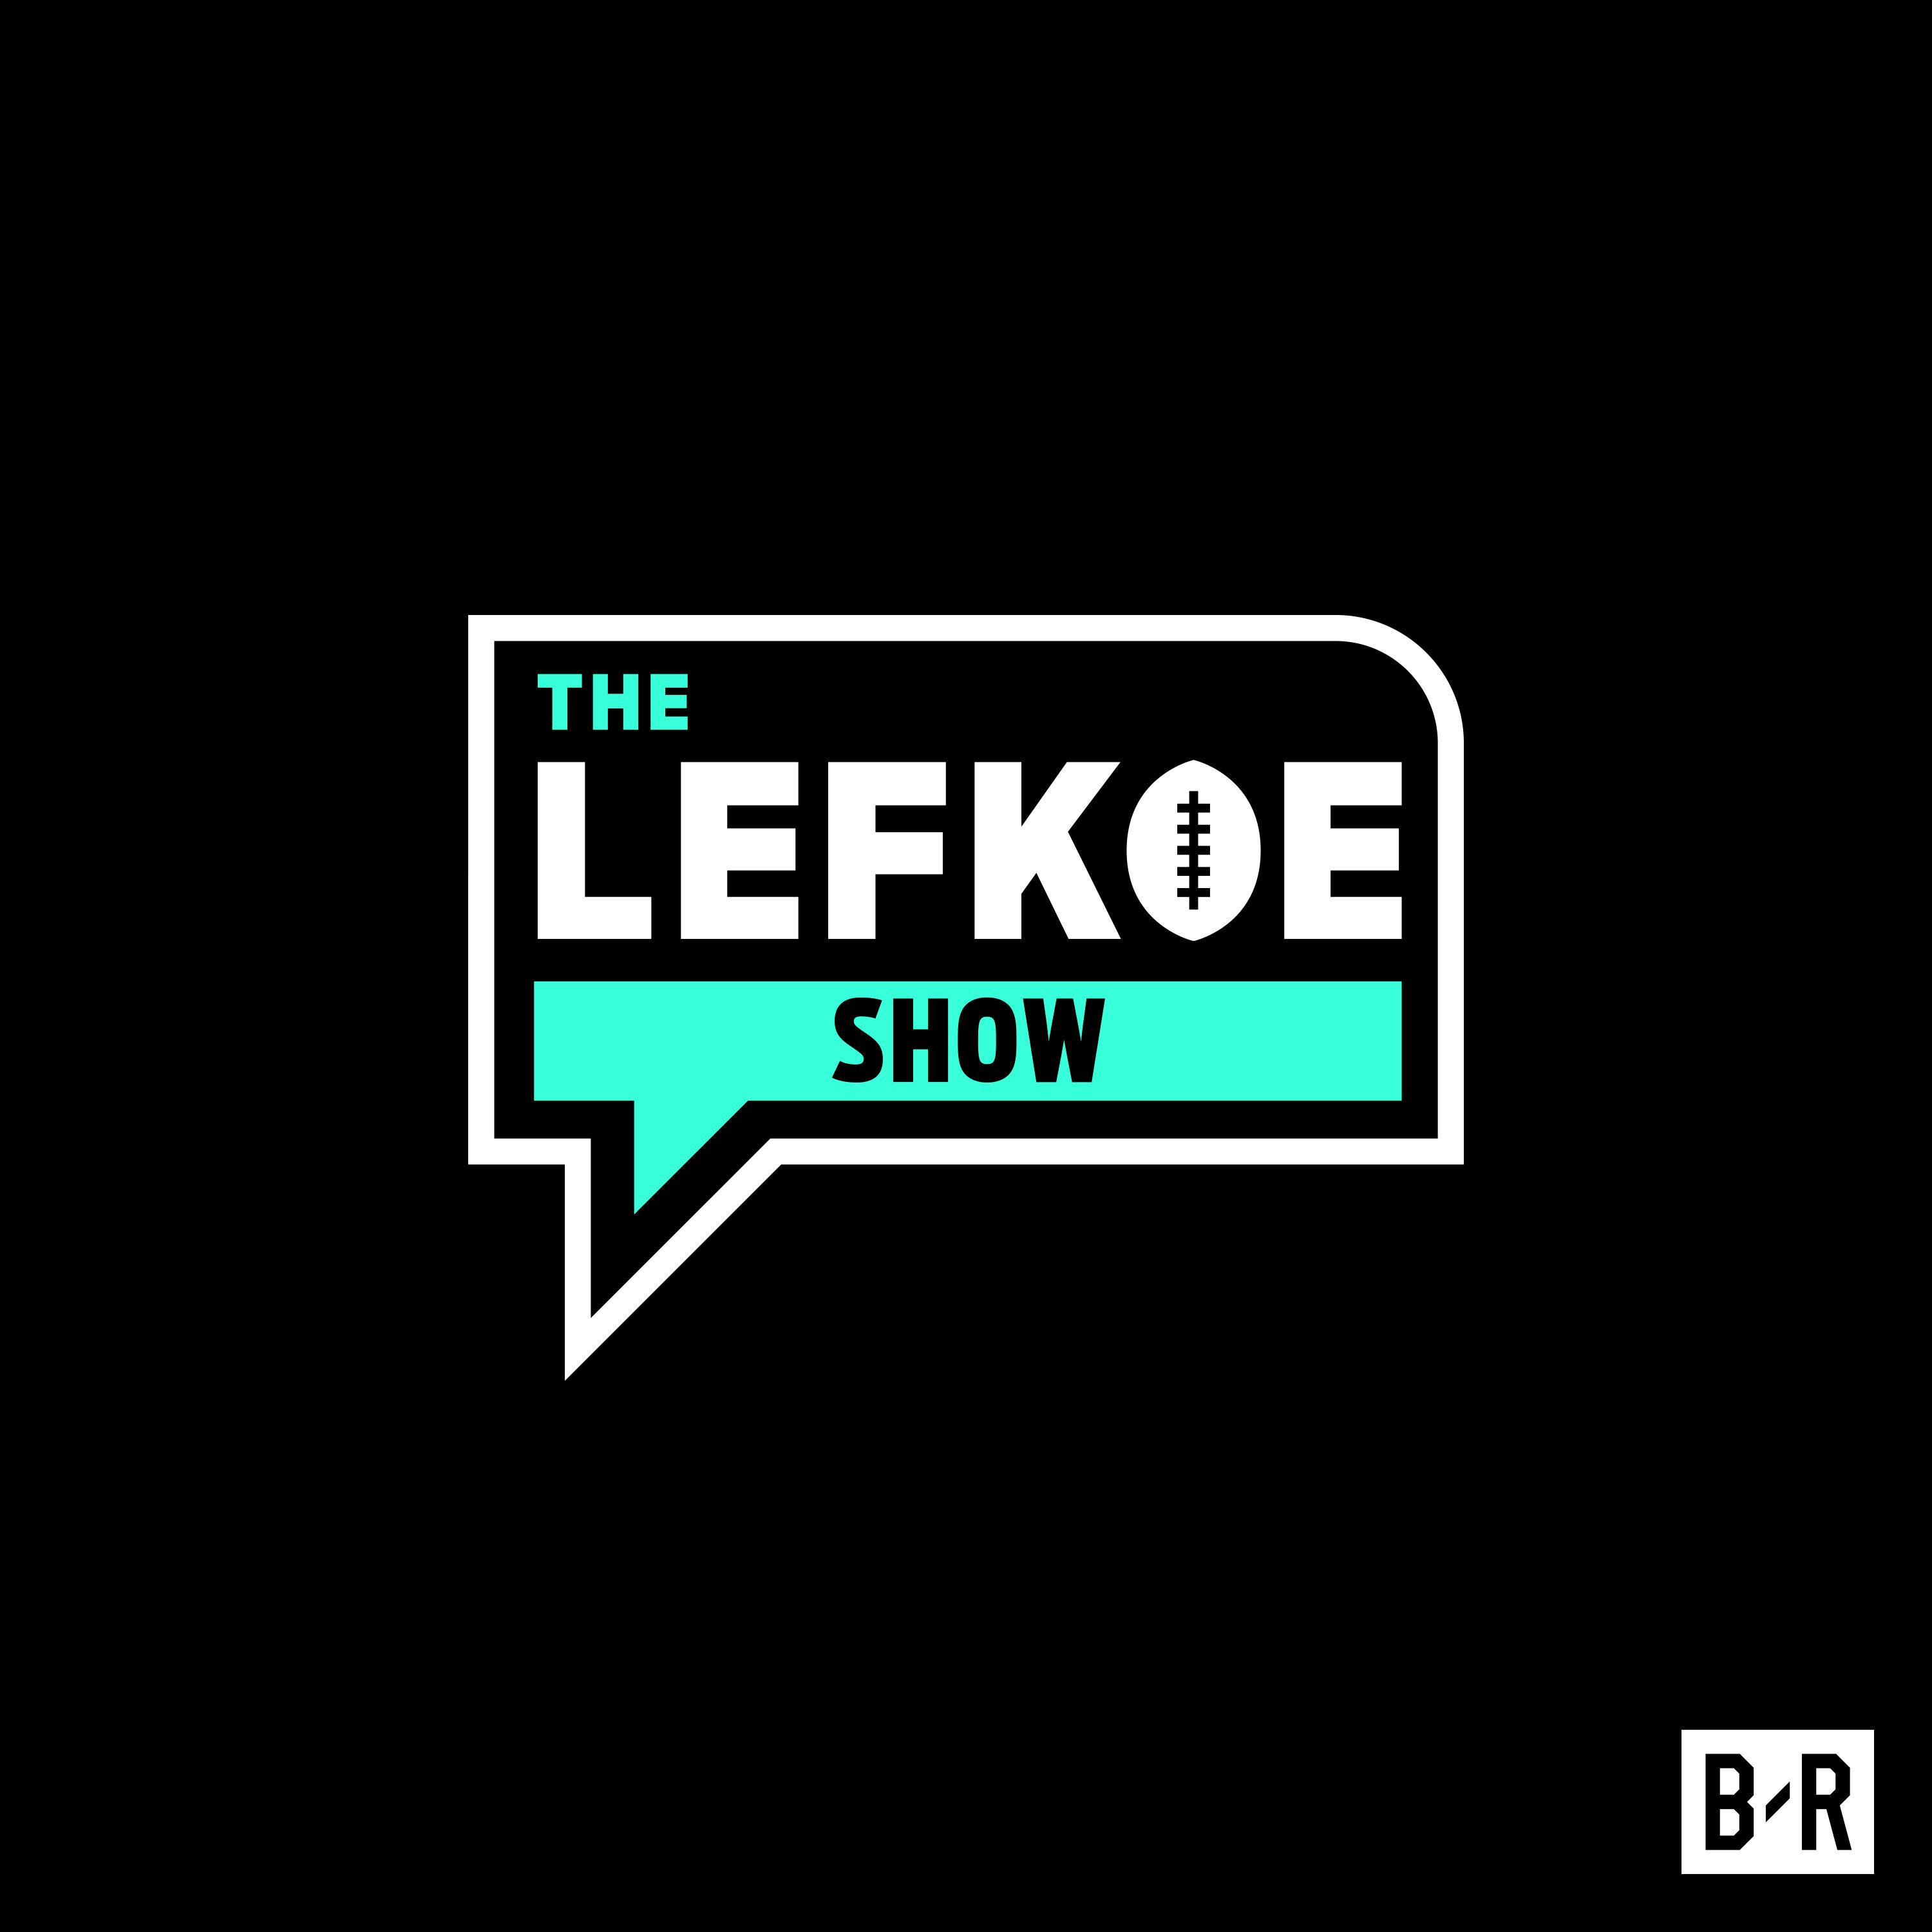 Ronny Chieng (The Daily Show) and D'Andre Swift (NFL Draft Prospect) Join! | The Lefkoe Show